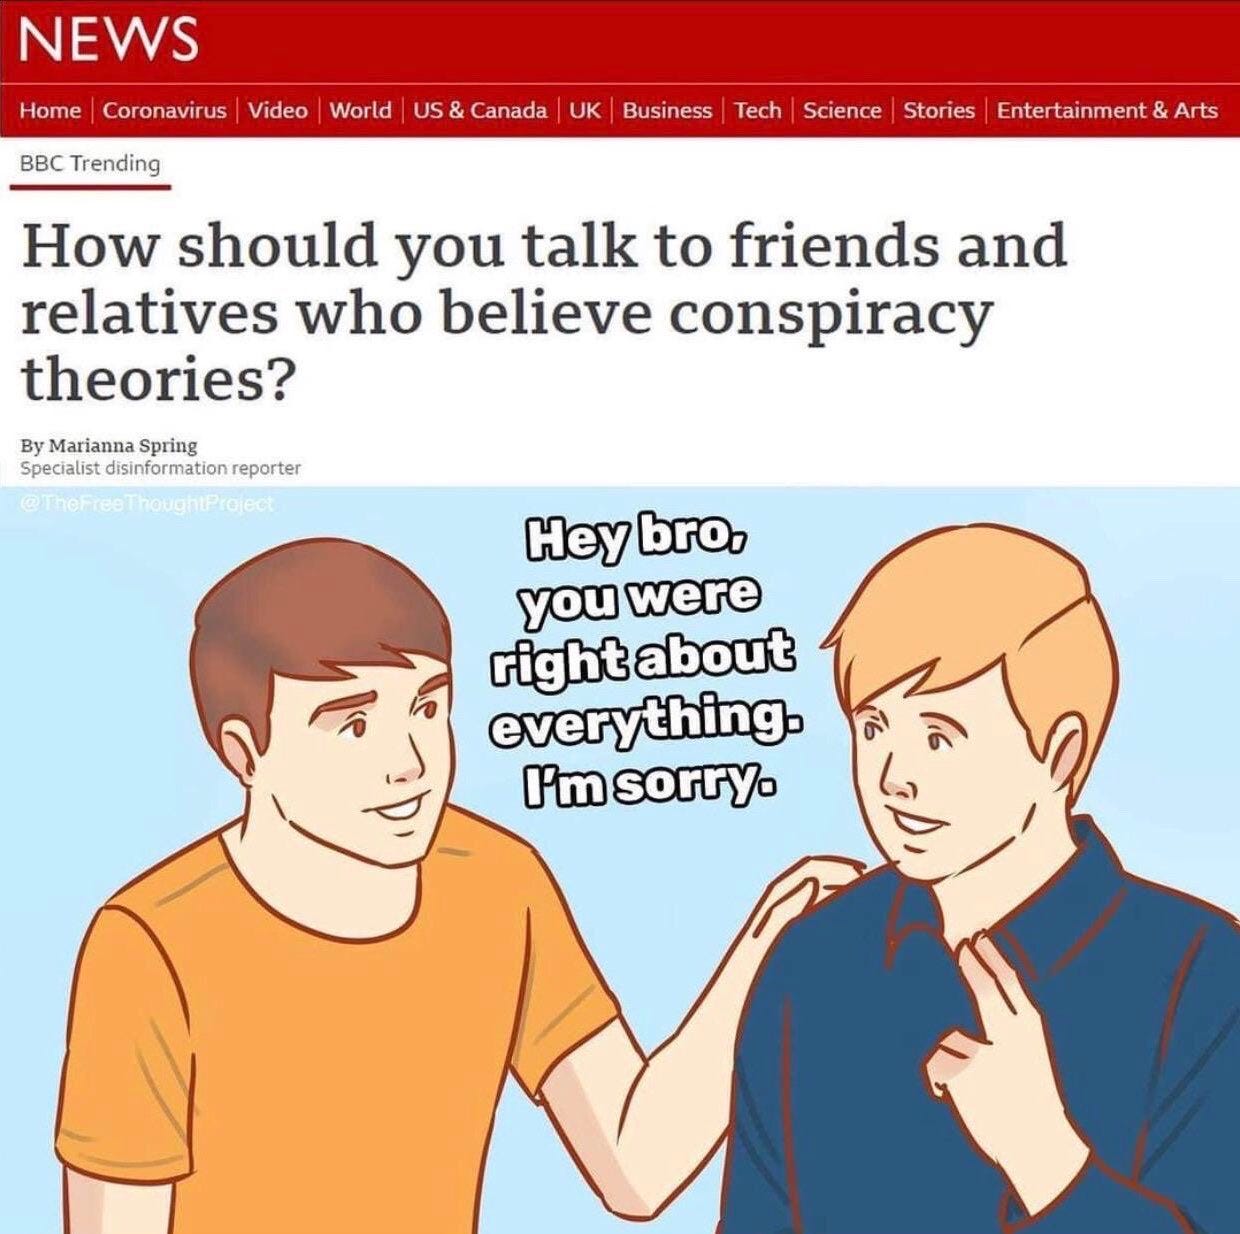 MIT Technology Review on Twitter: "Here's how to talk to friends and family  who believe in conspiracy theories. https://t.co/grFNDYmq29" / Twitter